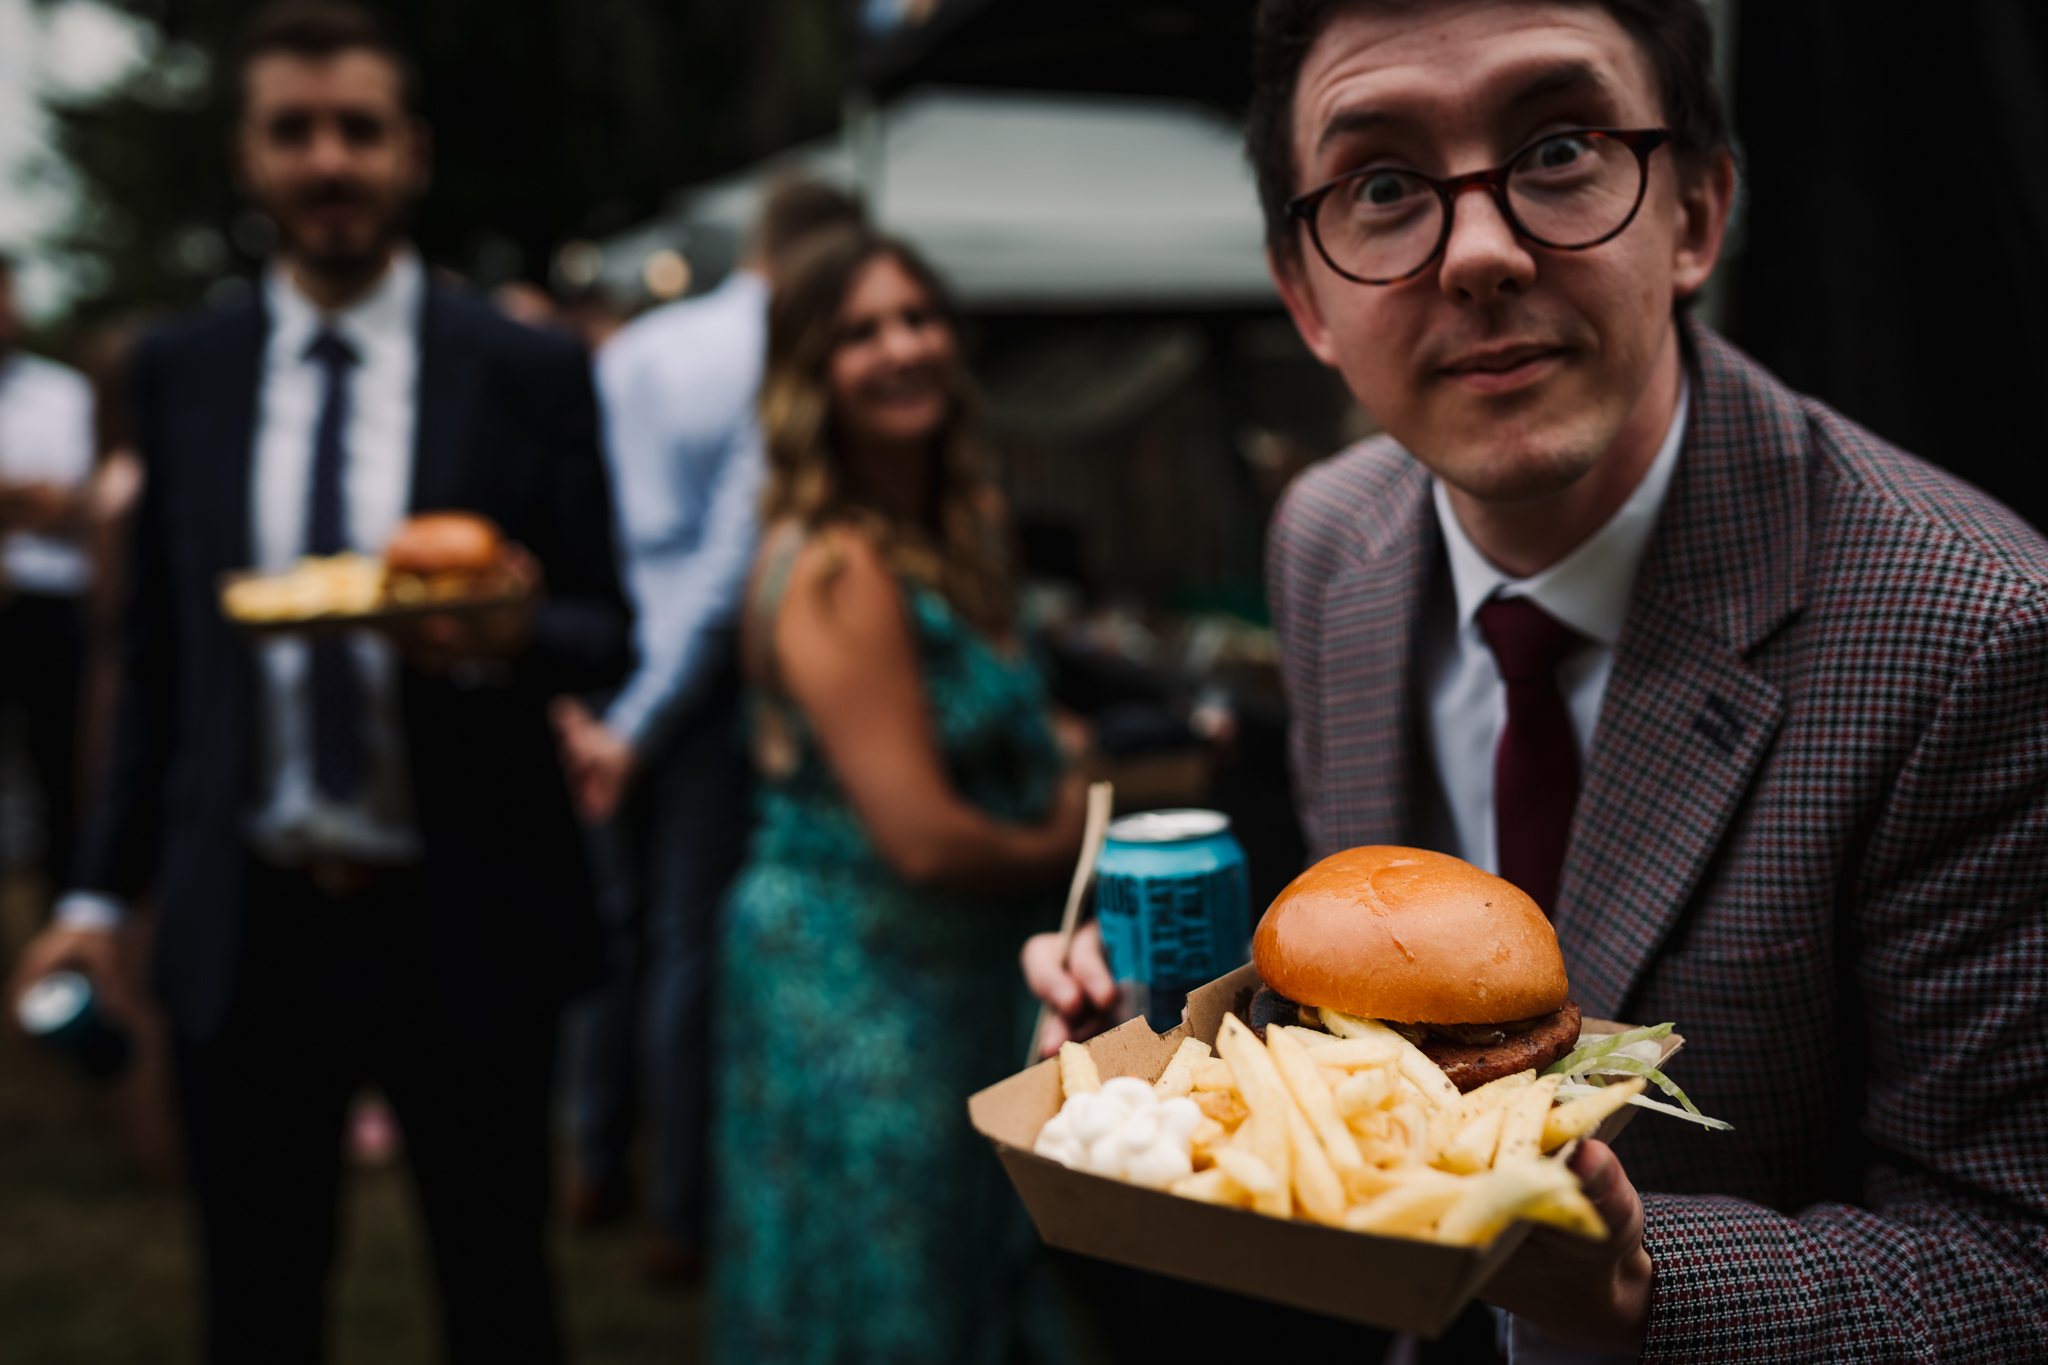 Hertfordshire Garden Party wedding Photographer captures guest showing off his food